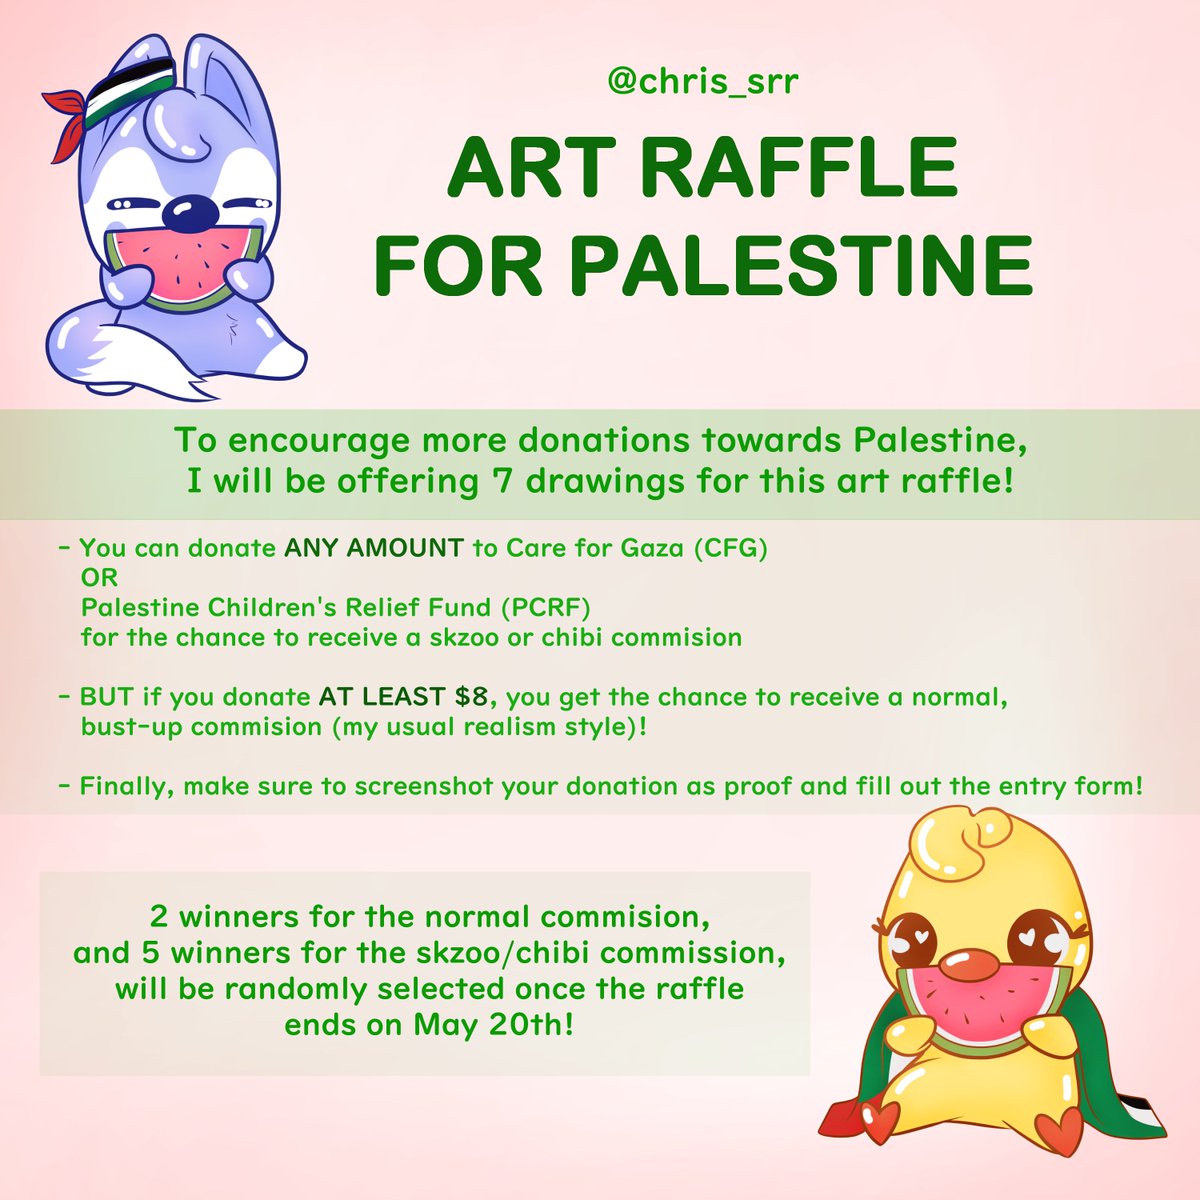 ART RAFFLE FOR 🍉 Hi! As many of you know my comms have been closed for years now, and ik several of you have been waiting for a chance again So, to encourage more donations towards Palestine, I'm offering 7 drawings in this art raffle! Please read and fill out the form below!